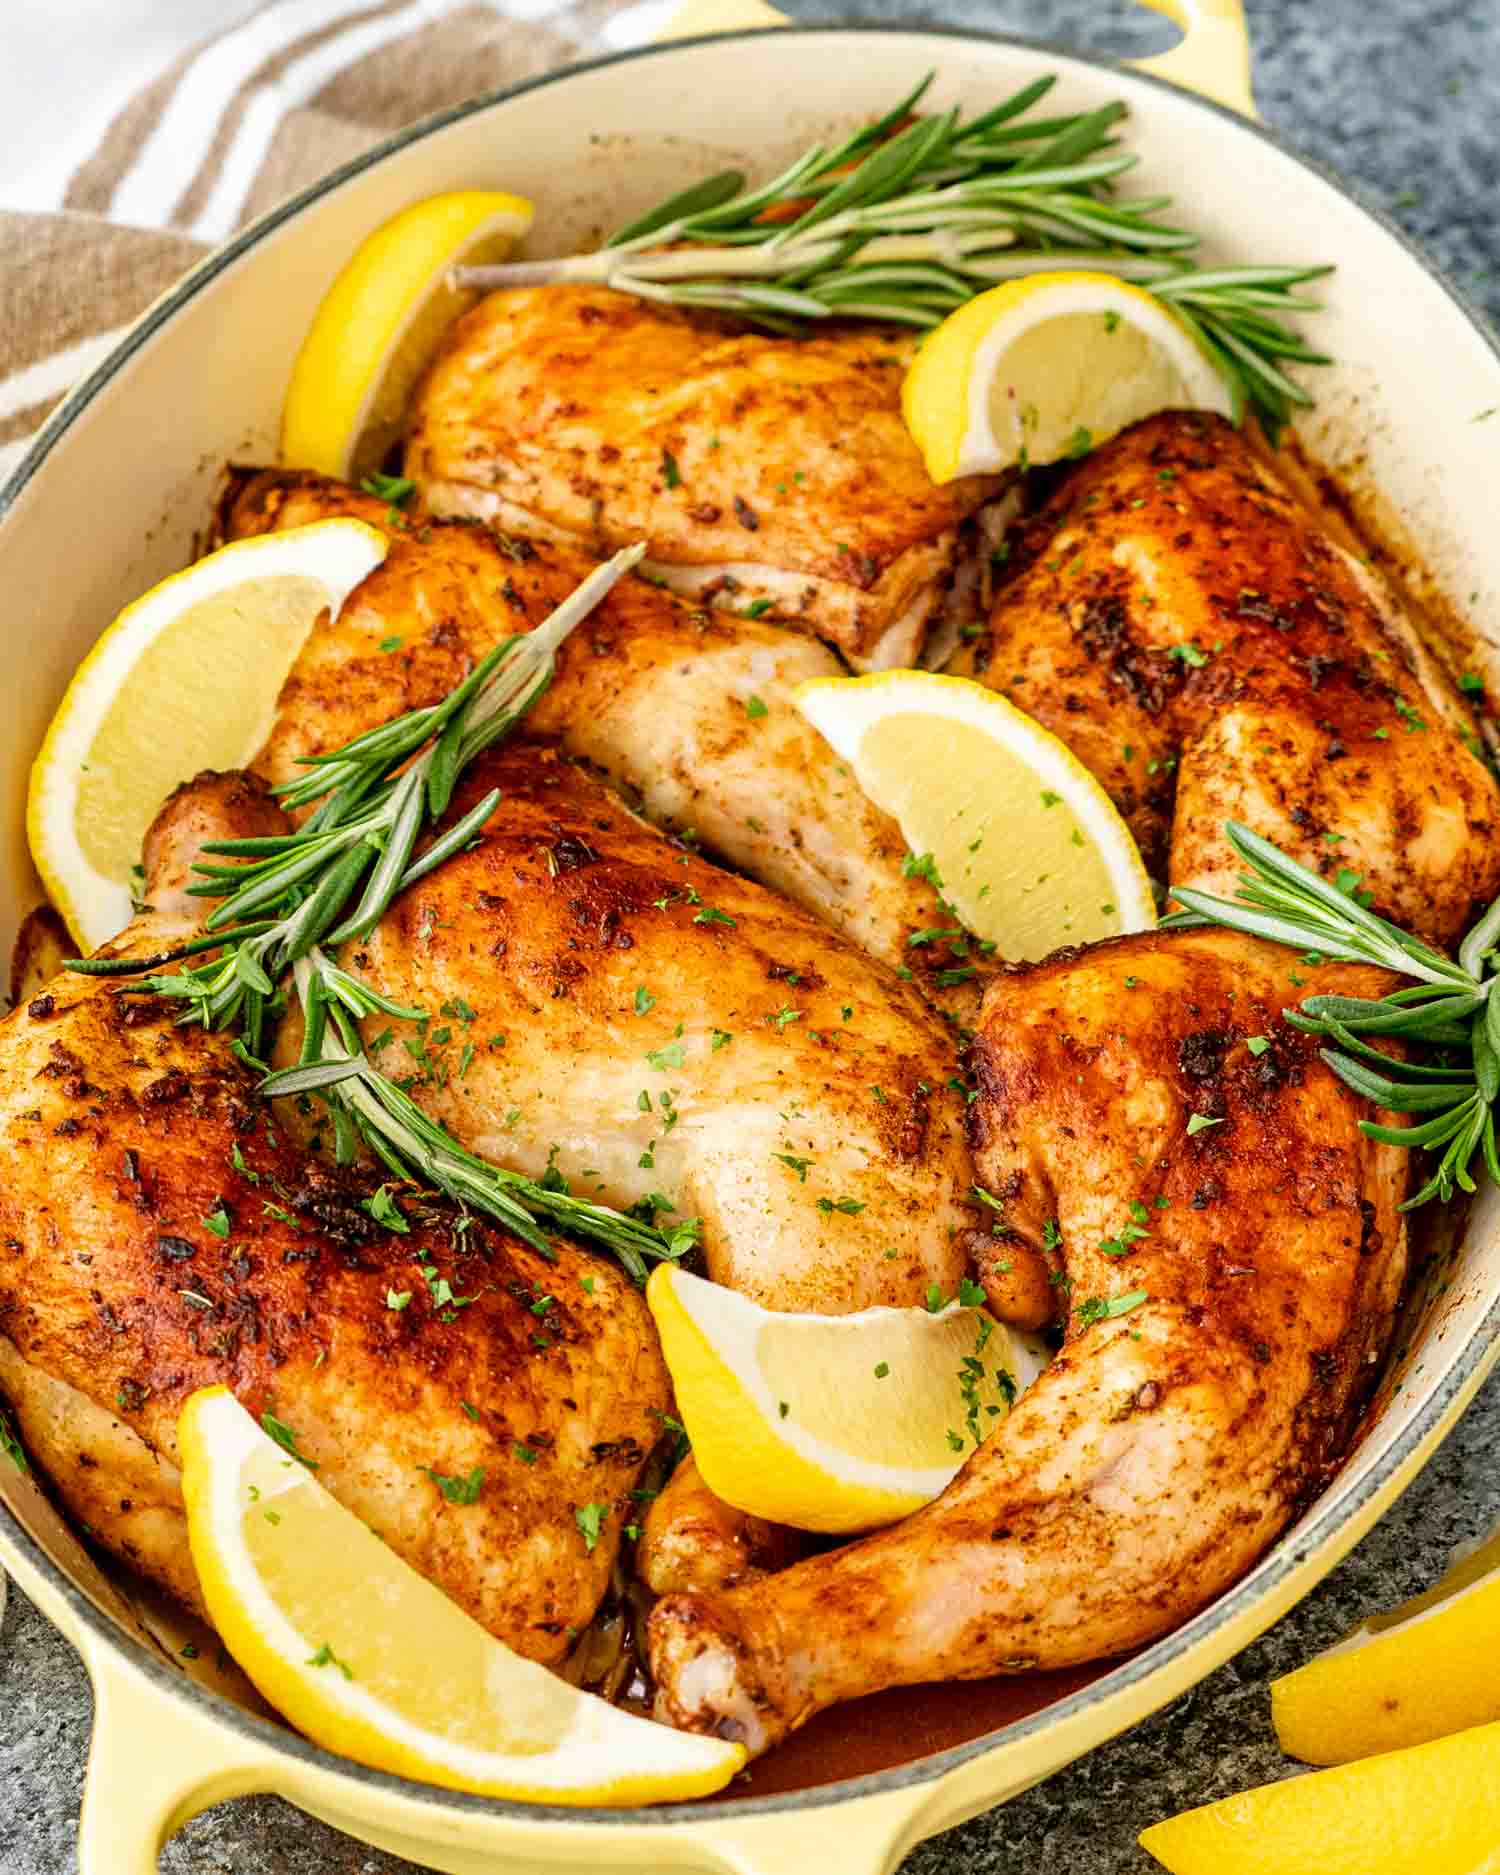 fresh out of the oven baked chicken legs in a baking pan garnished with lemon wedges and rosemary.